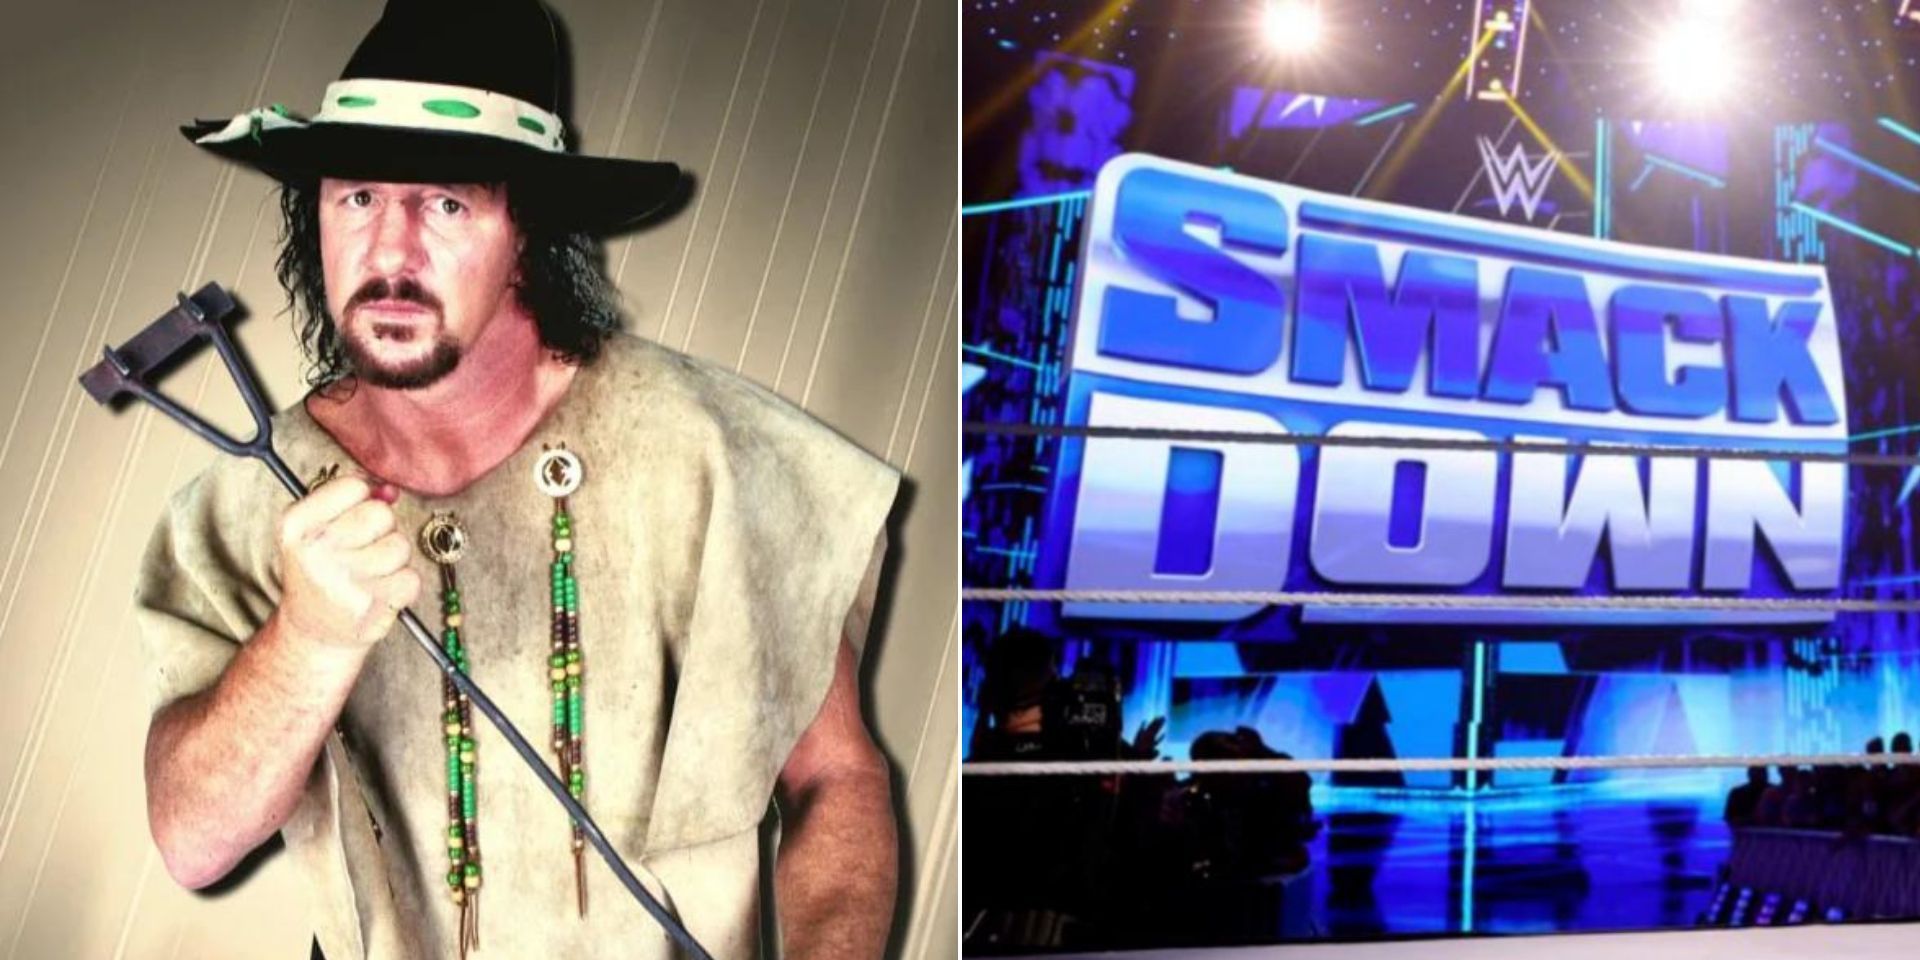 WWE honored Terry Funk on SmackDown